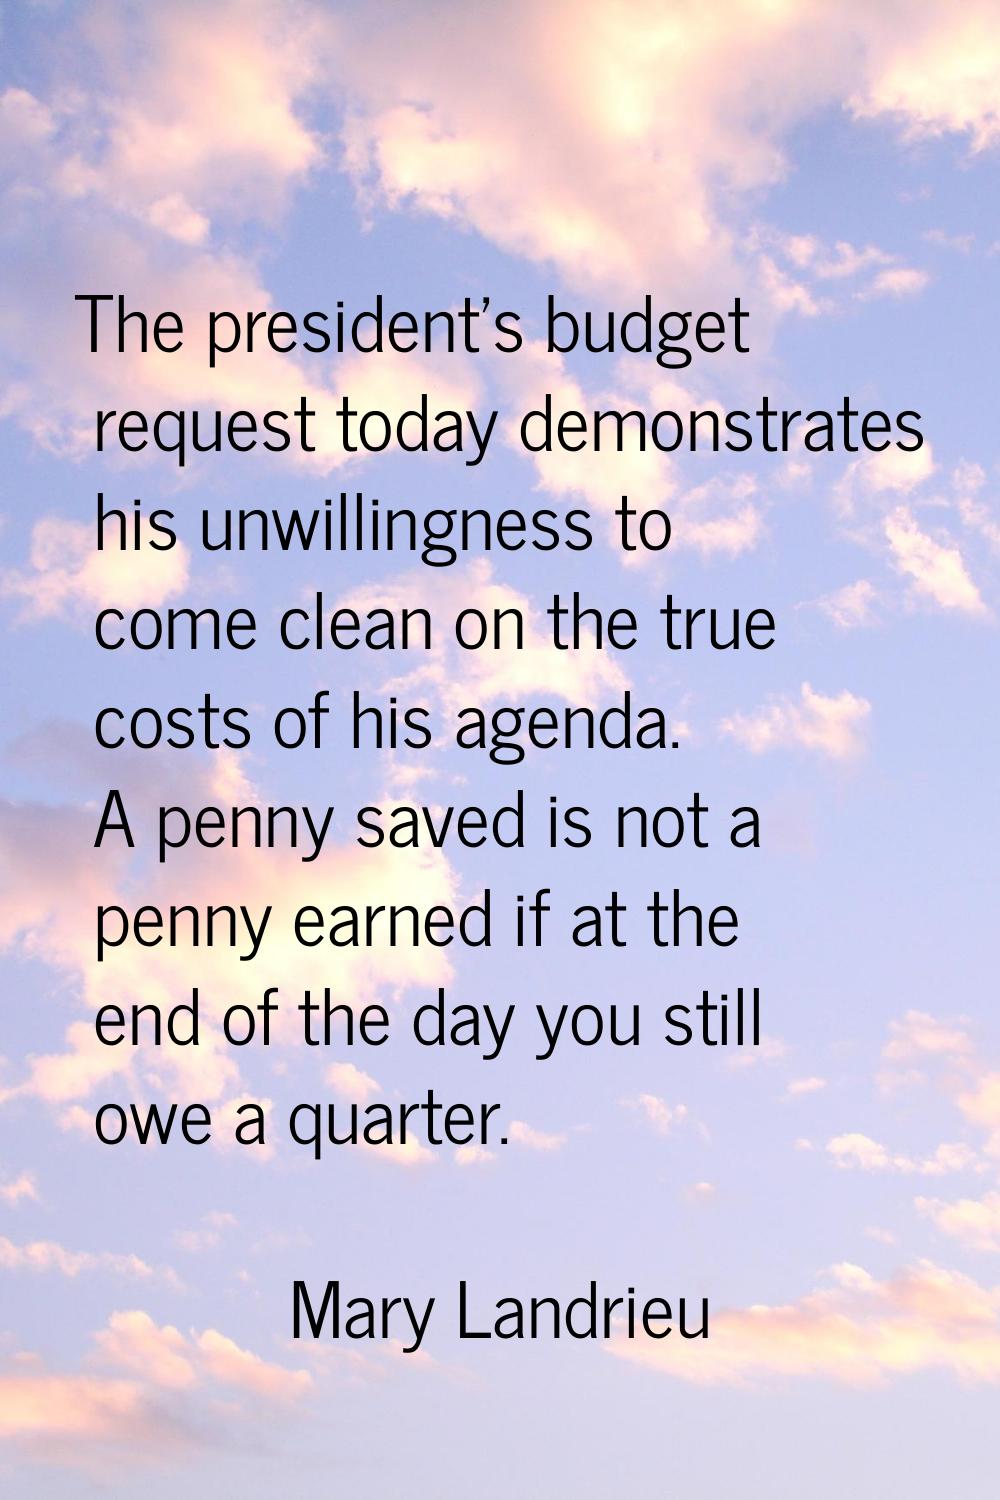 The president's budget request today demonstrates his unwillingness to come clean on the true costs